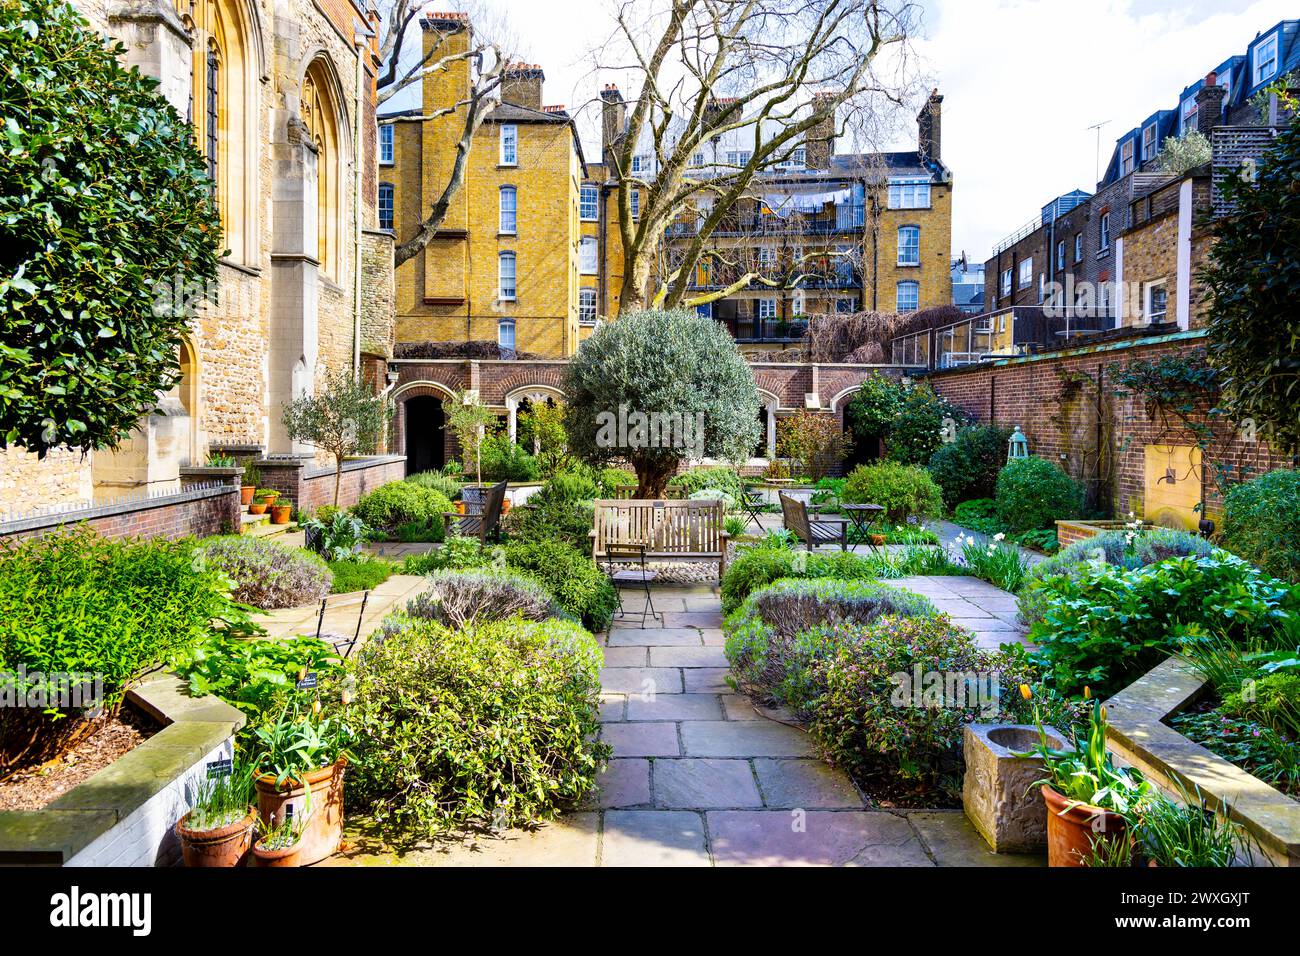 Cloister Garden at the Museum of the Order of St John next to St John Priory Church, Clerkenwell, London, England Stock Photo